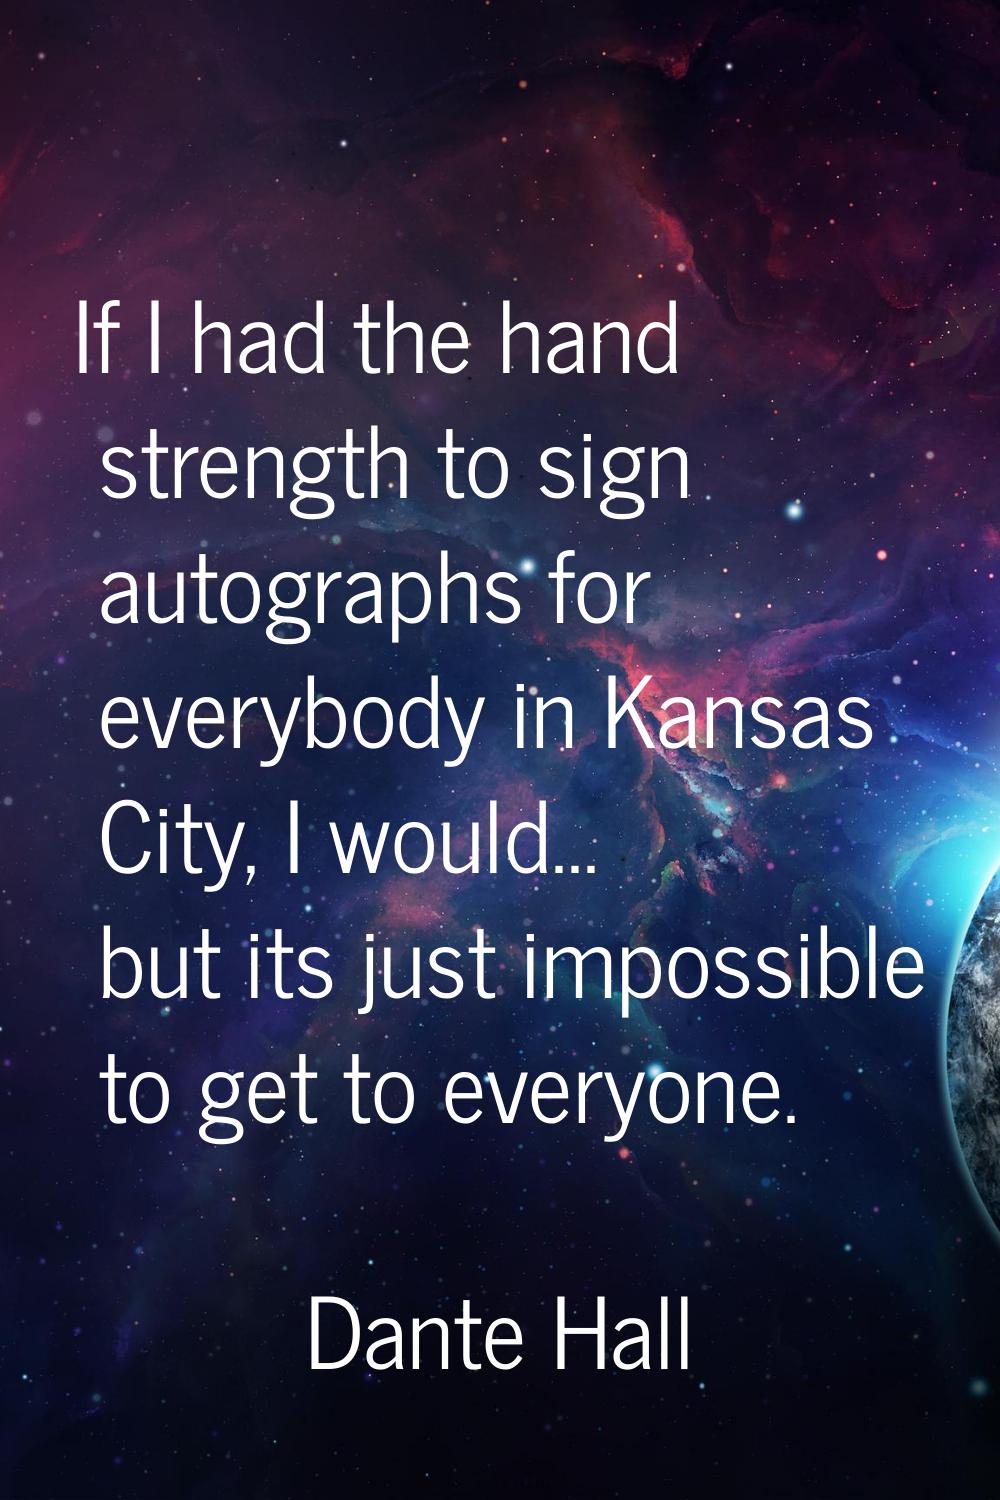 If I had the hand strength to sign autographs for everybody in Kansas City, I would... but its just